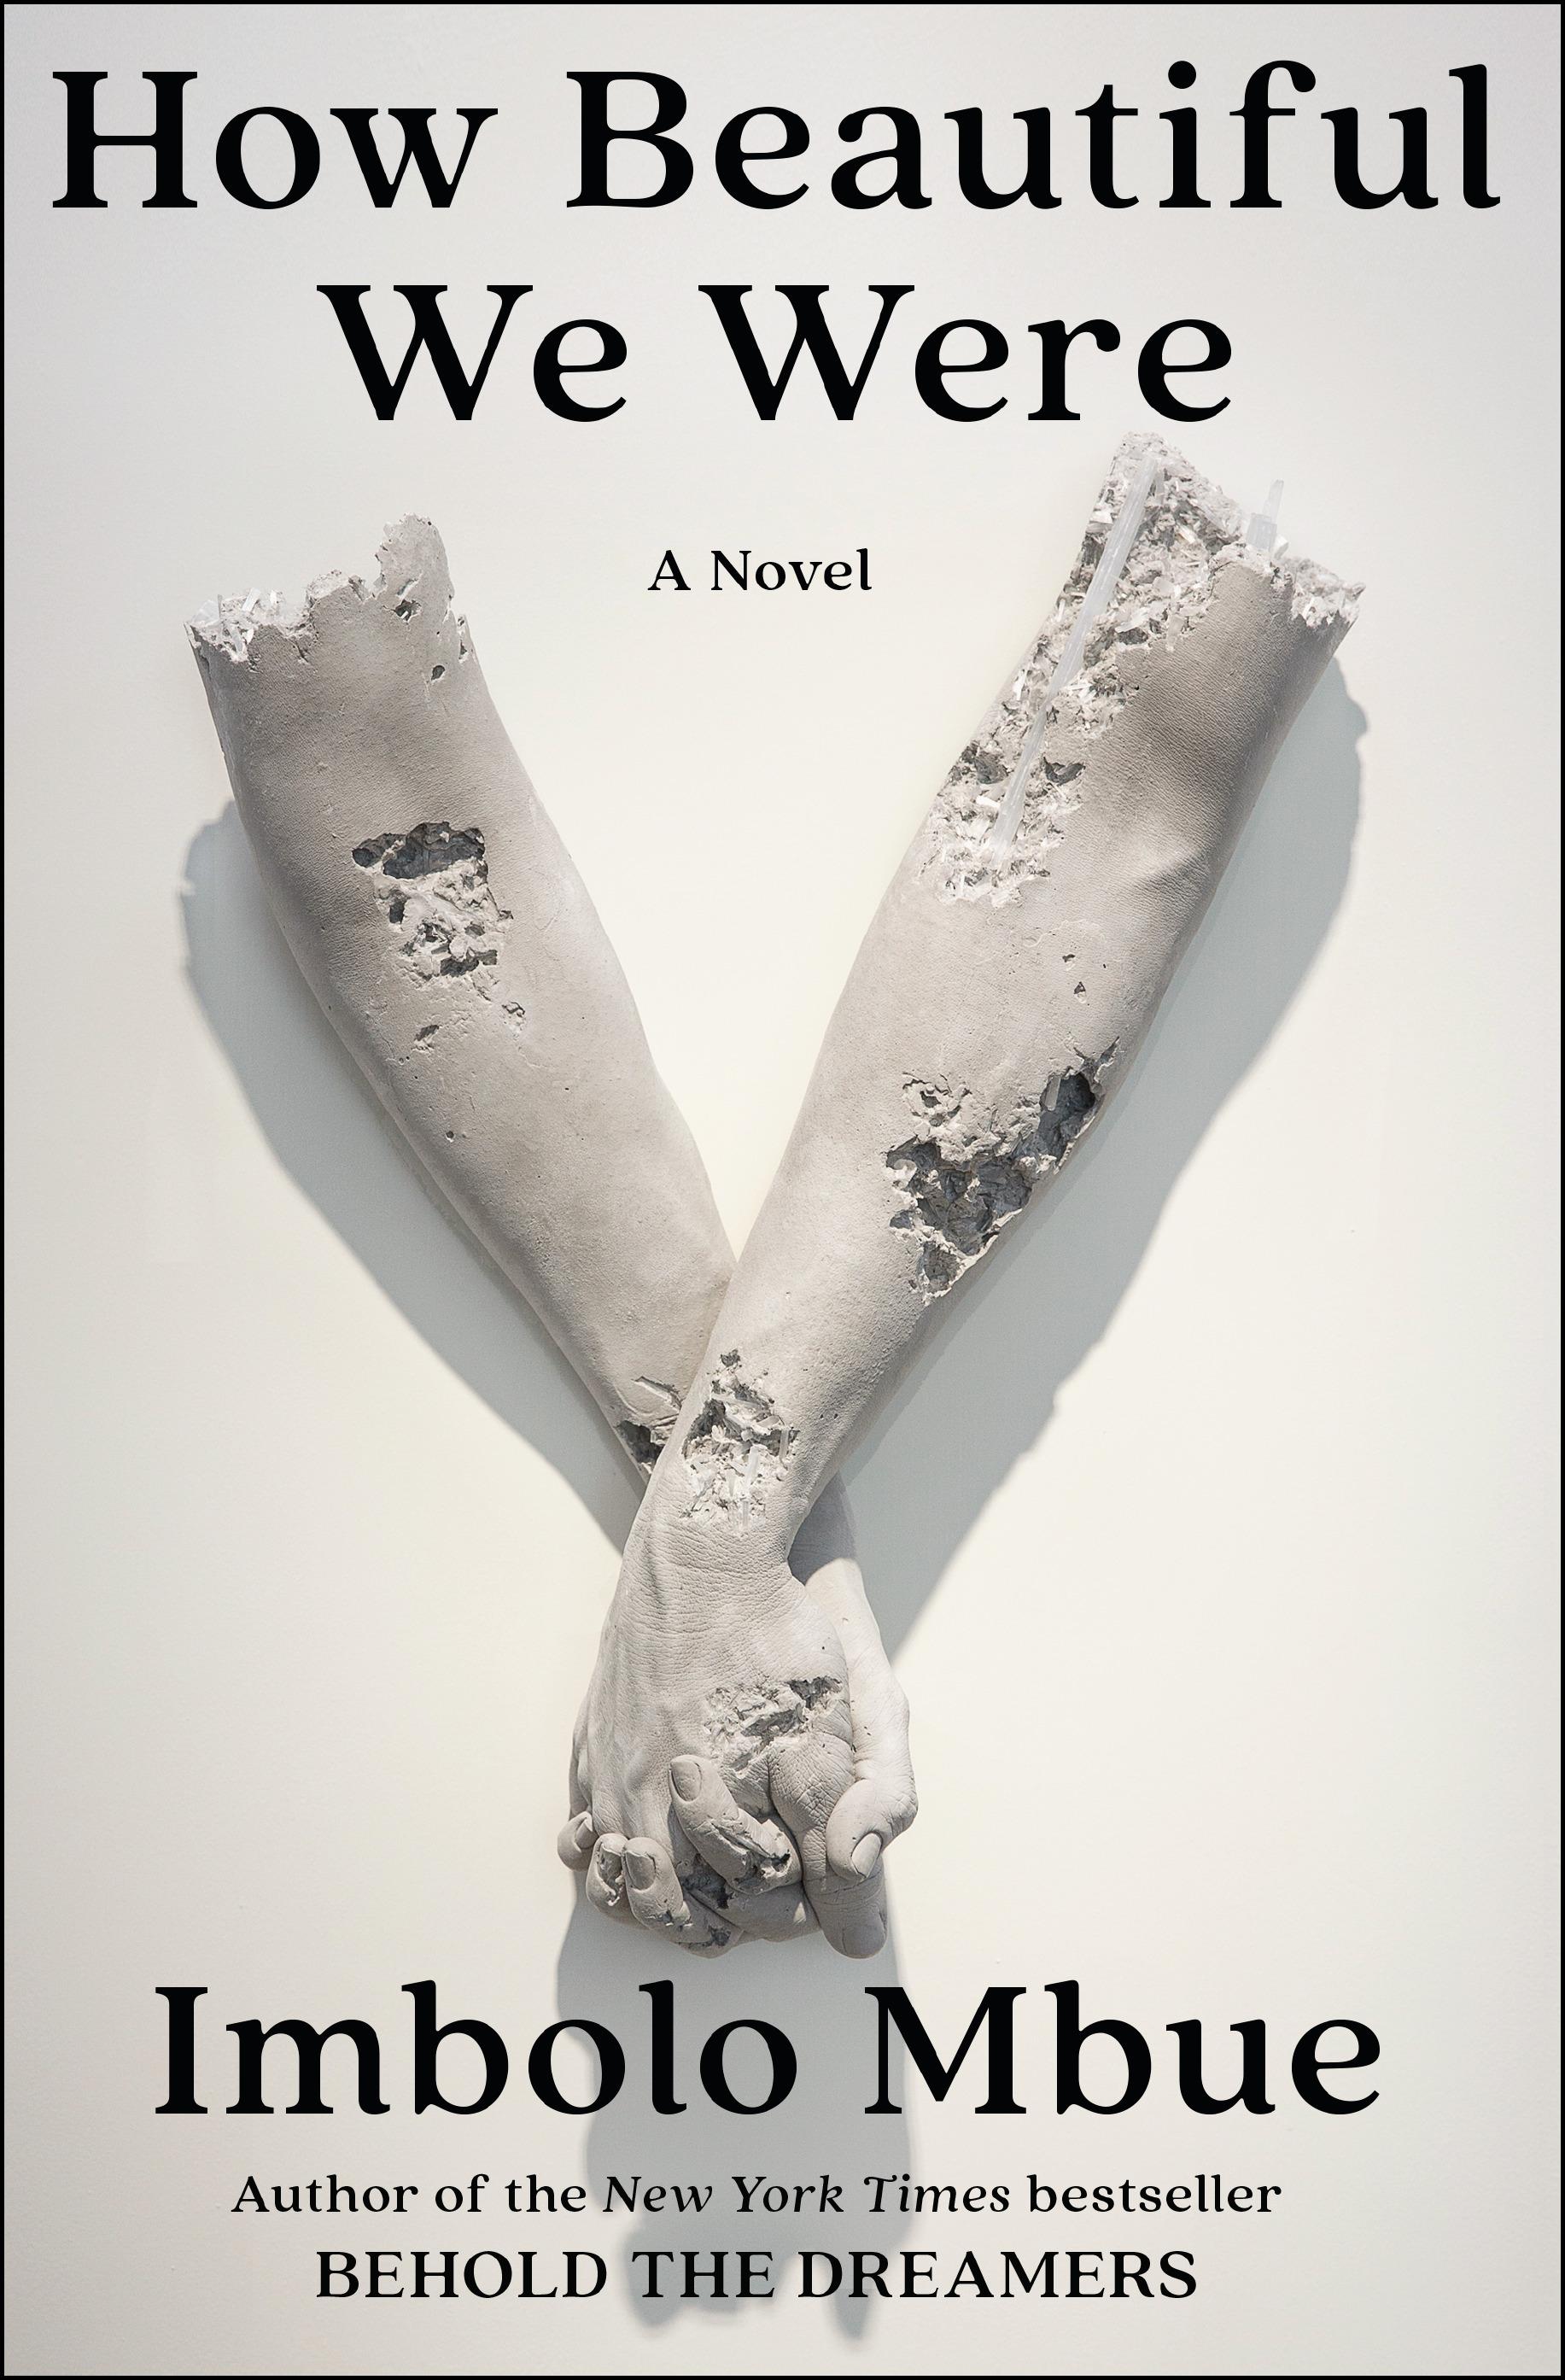 Cover image of a black and white novel cover